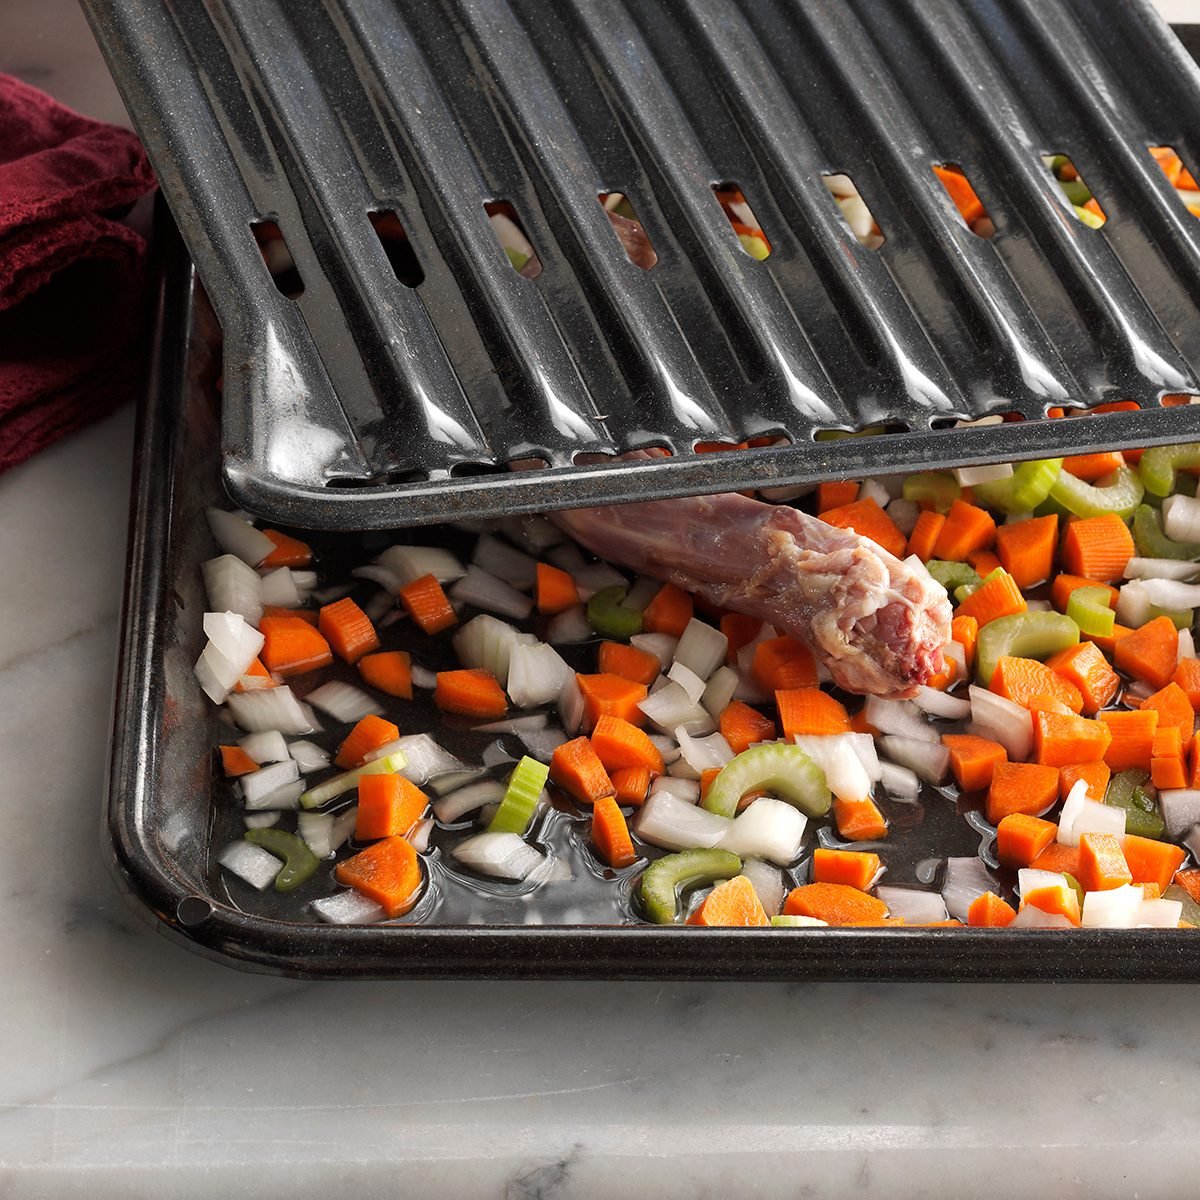 Norpro 2 Piece Stainless Steel Rectangular Oven Roasting Broil Pan and Drip  Tray, 1 Piece - Harris Teeter